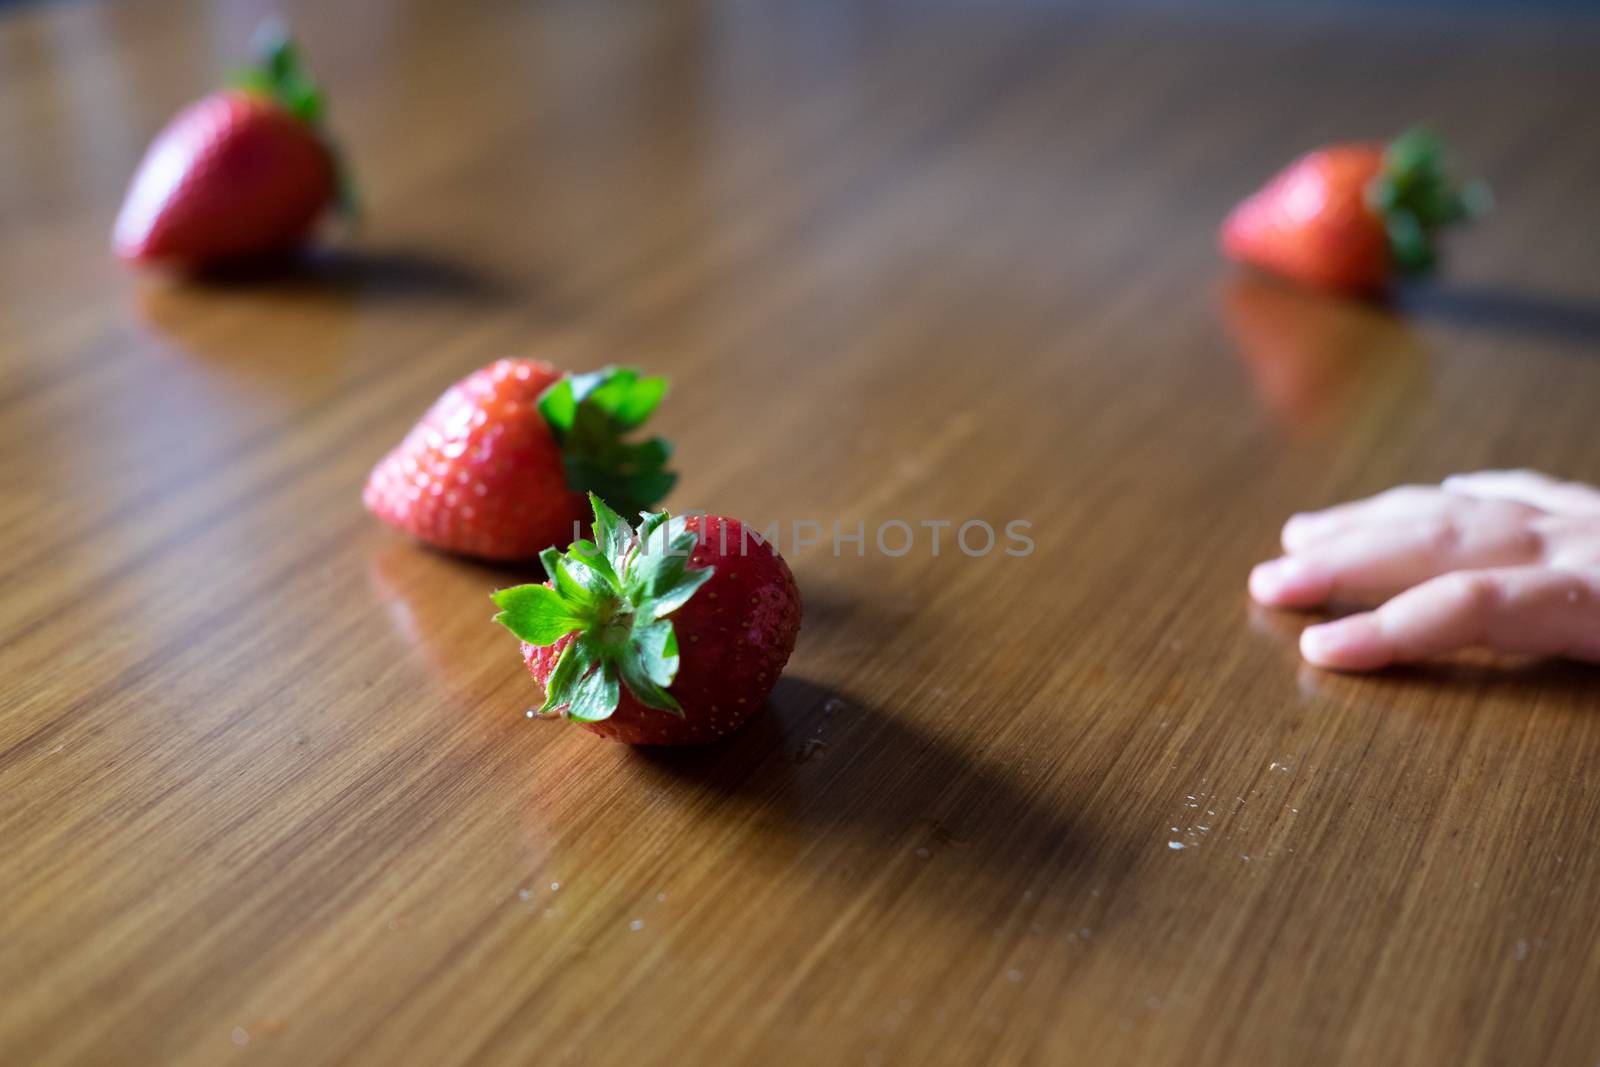 Baby s hand manipulating different fruits on a wooden table by mikelju